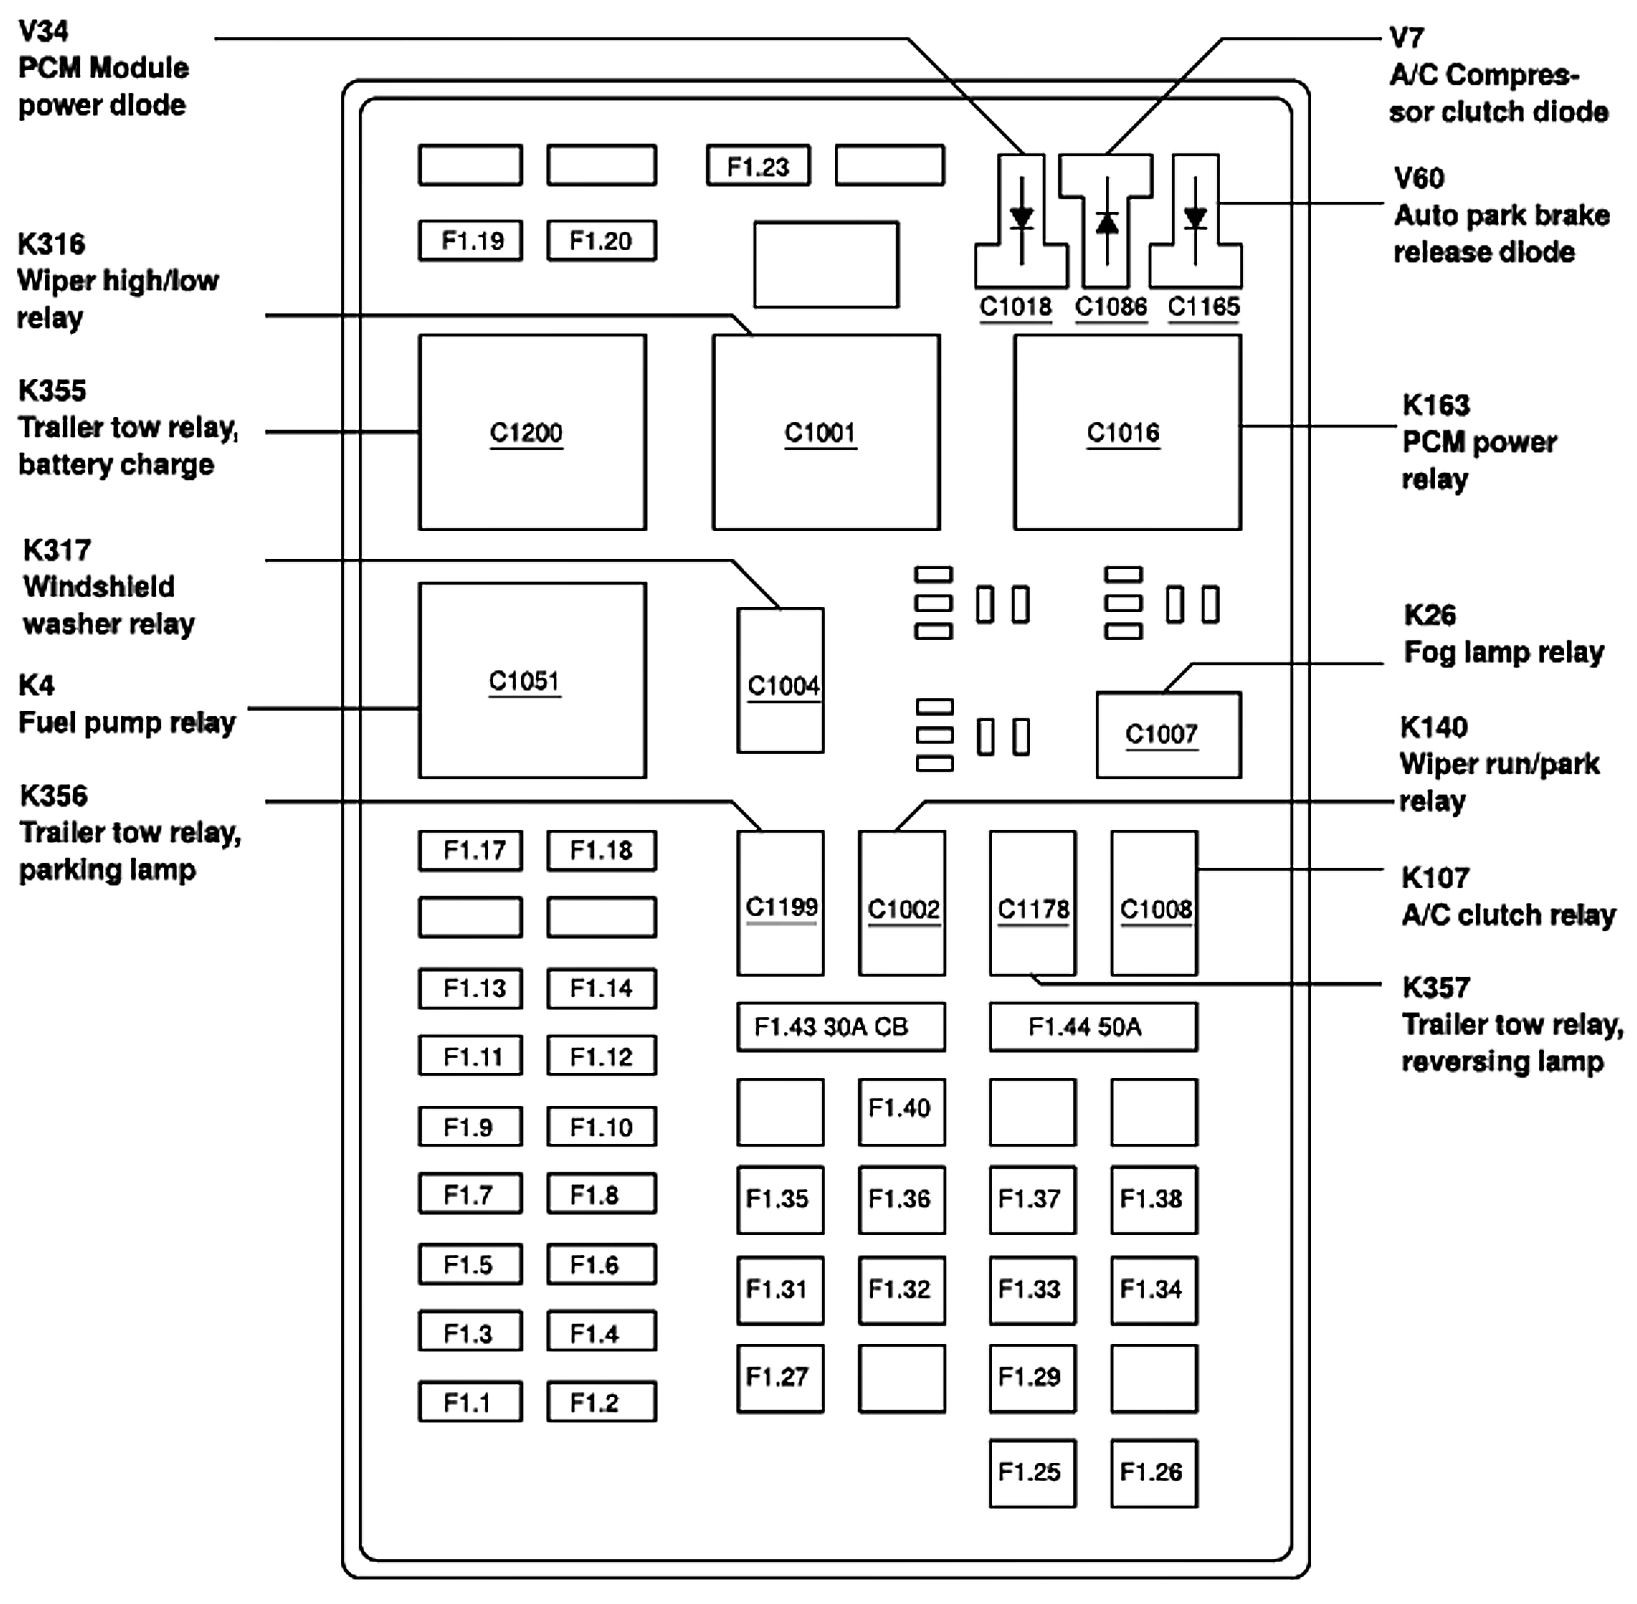 2002 Lincoln Ls Power Seat Fuse Diagram Wiring Diagram